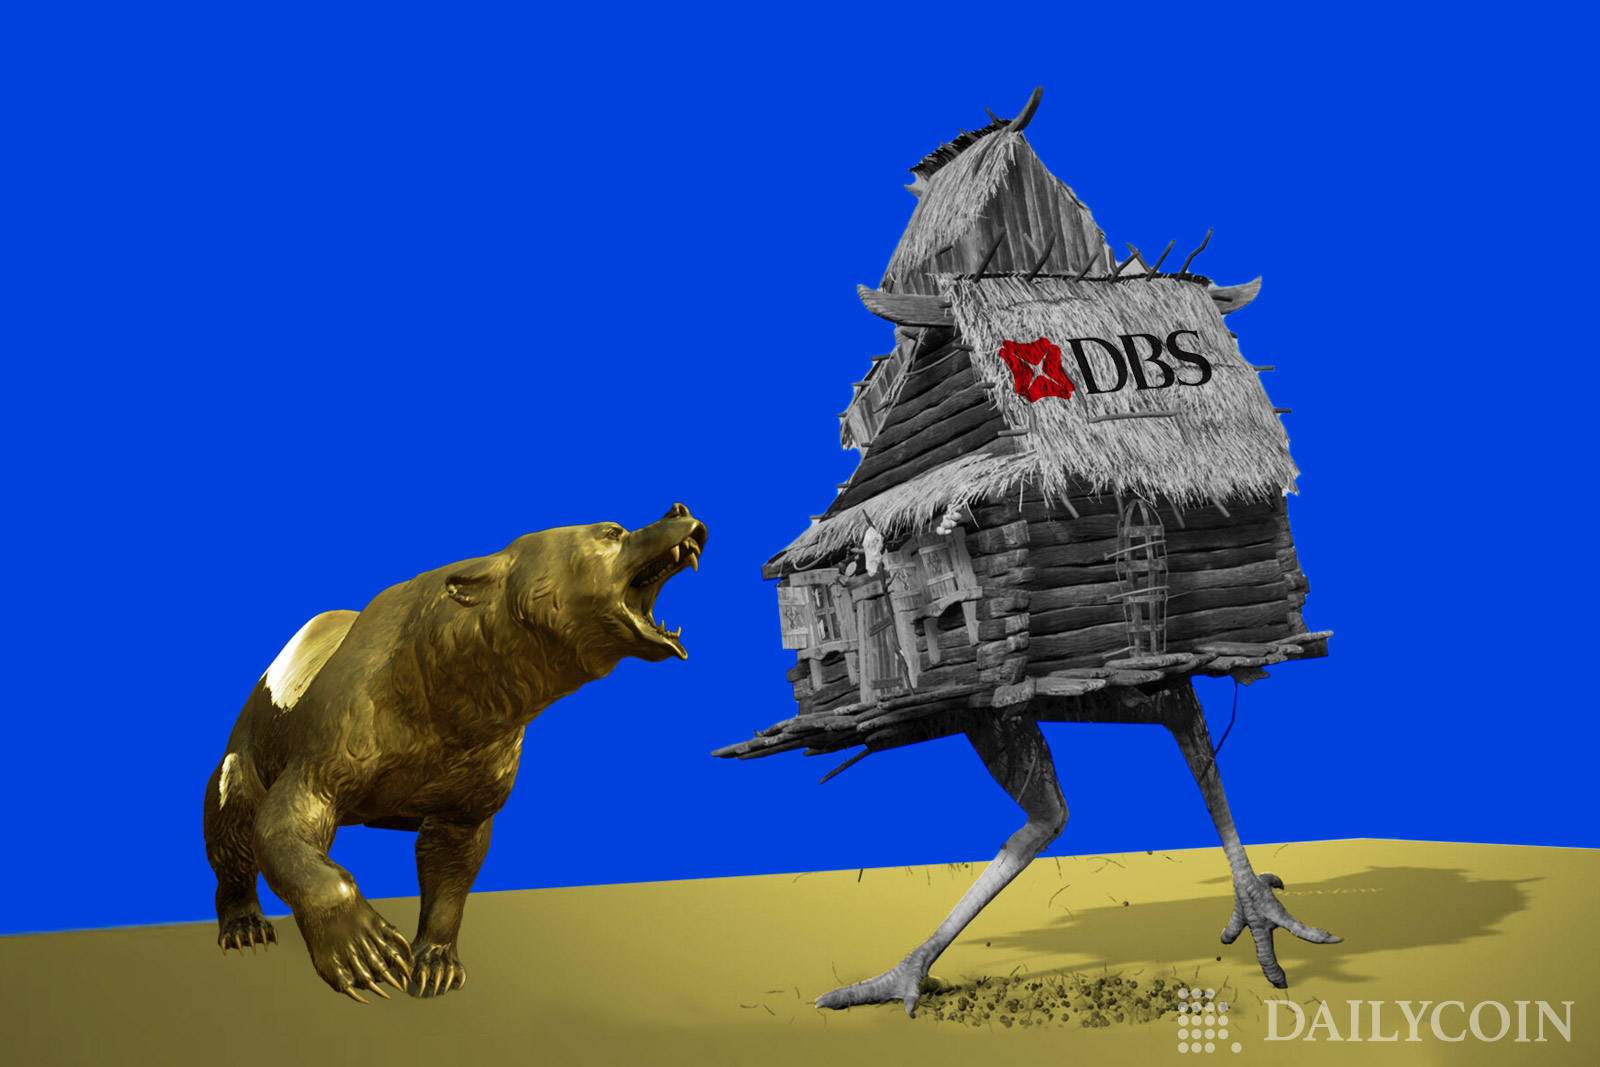 Singapores-Biggest-Bank-DBS-Plans-To-Grow-Its-Crypto-And-Digital-Assets-Business-Despite-The-Bear-Market